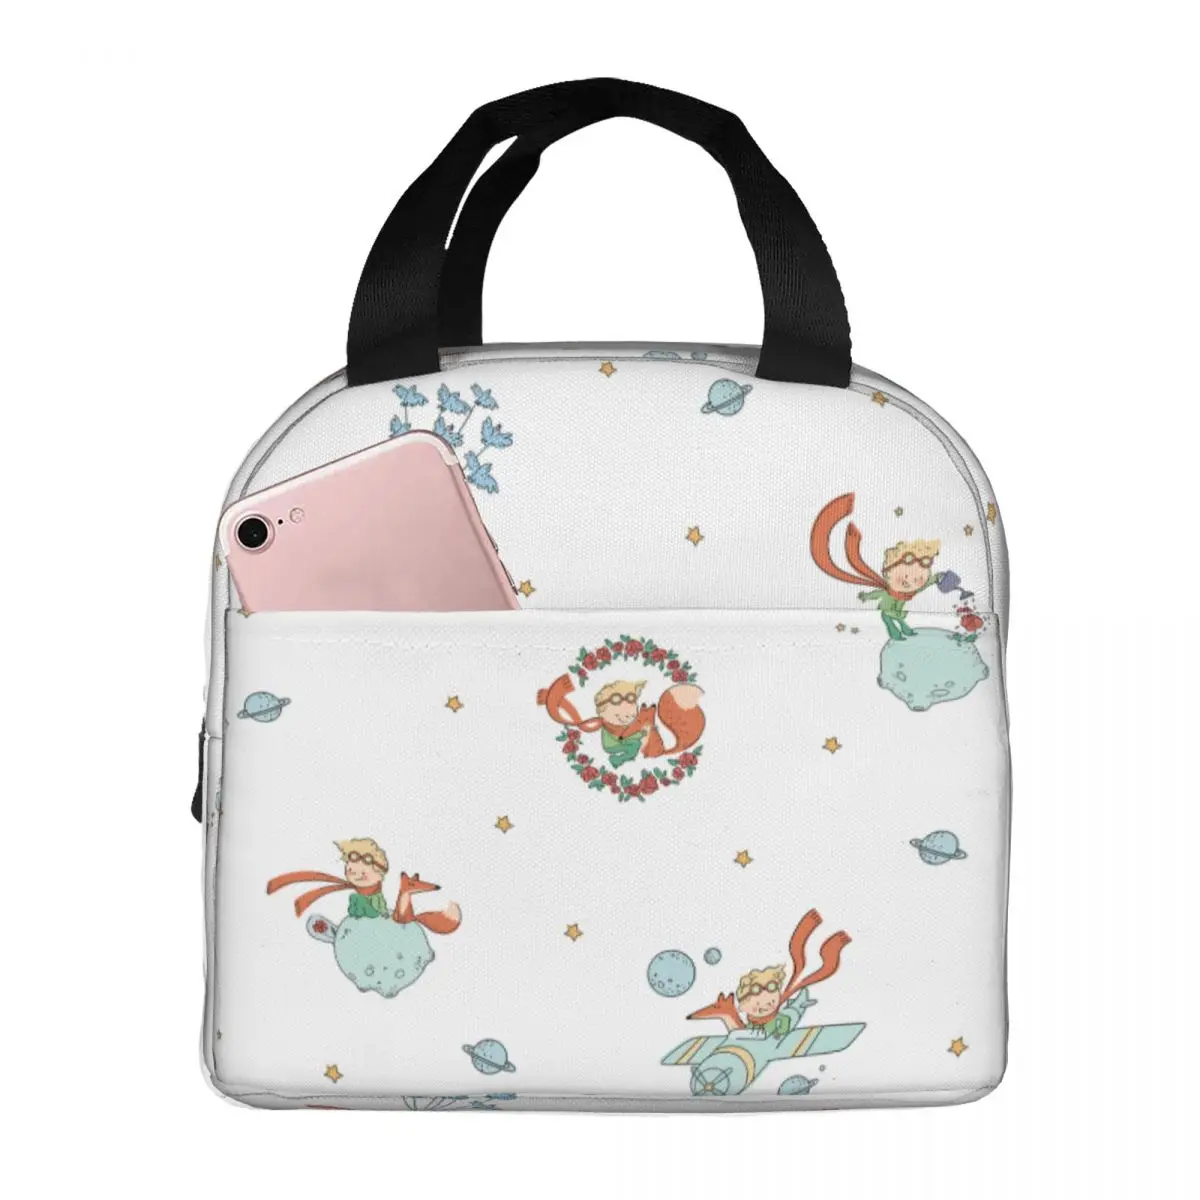 Lunch Bag for Women Kids Cute The Little Prince Fox And Stars Insulated Cooler Portable School Oxford Tote Food Bag